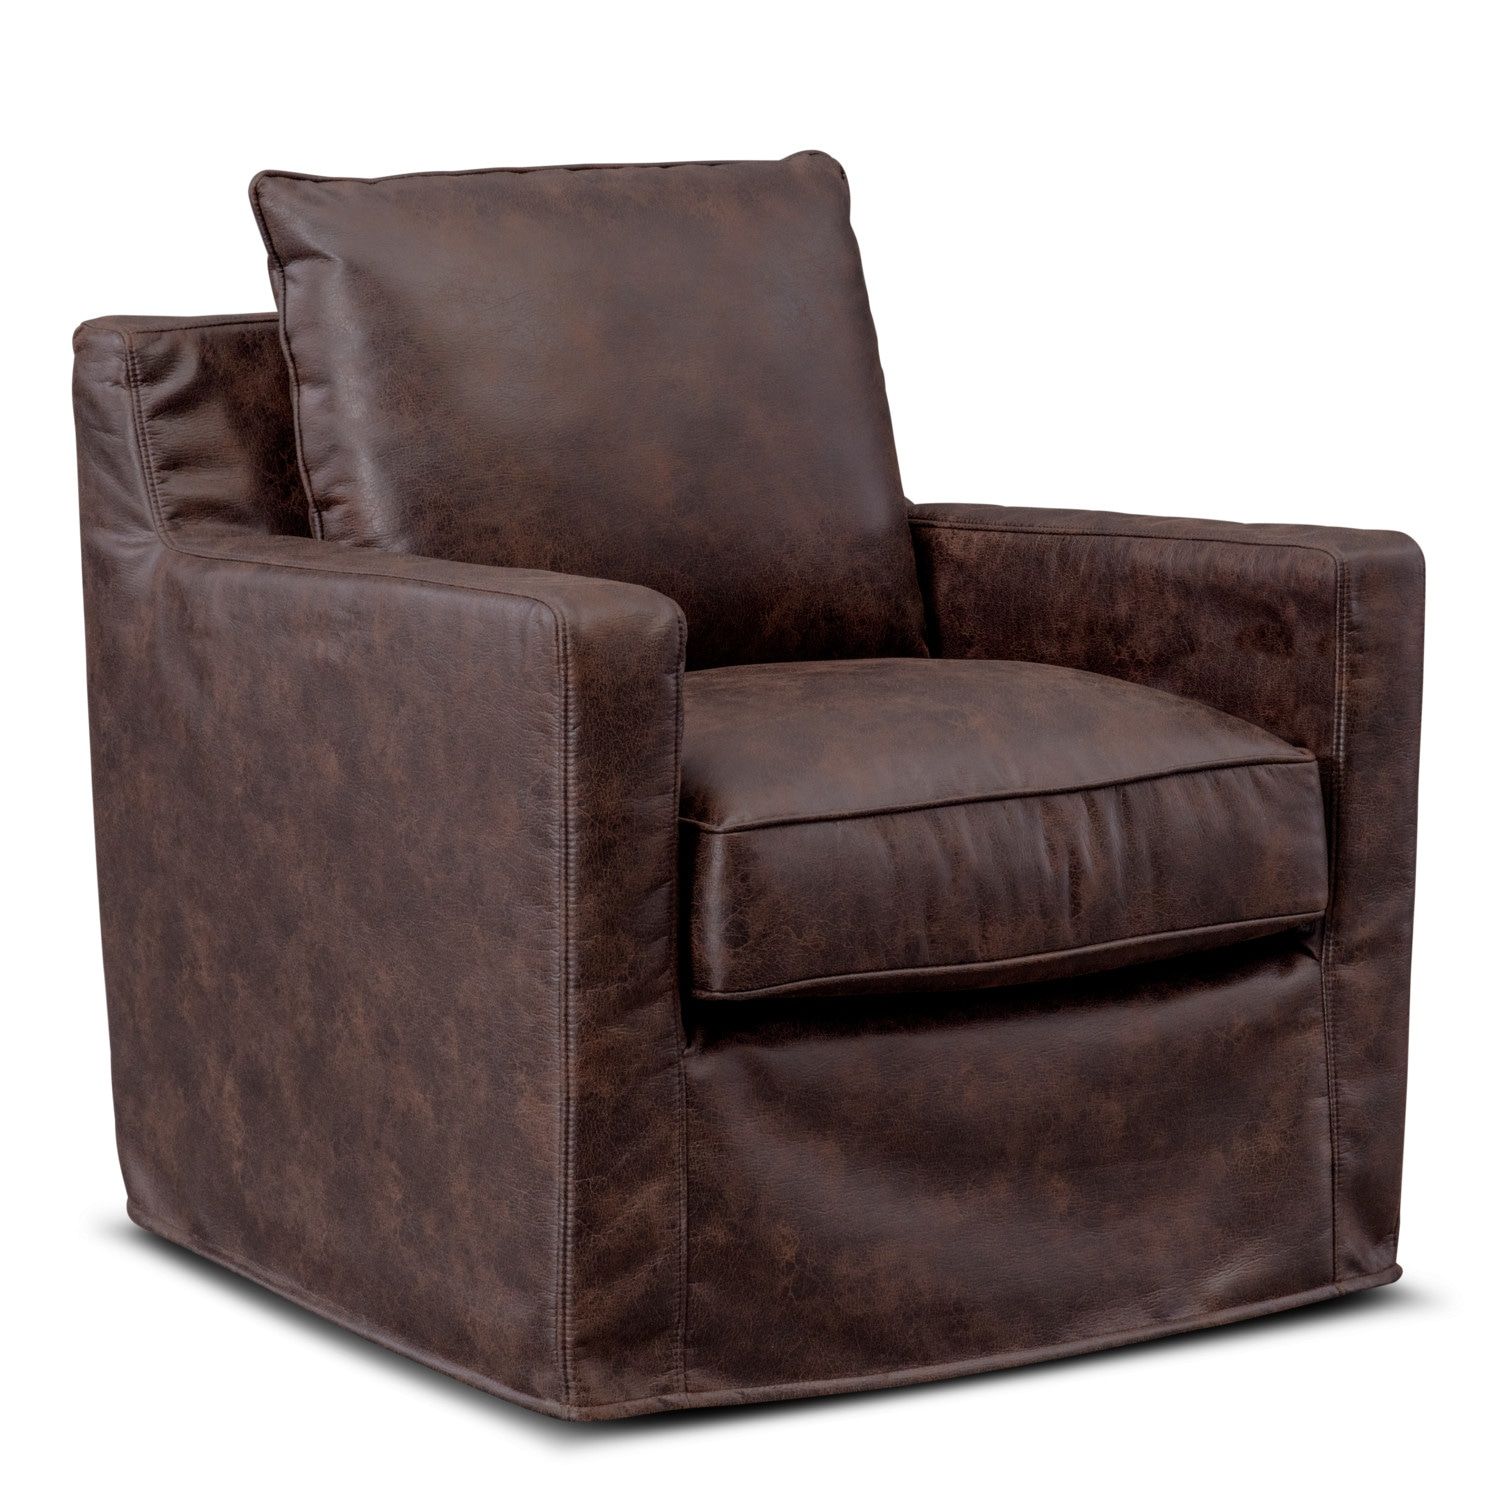 Eastwood Swivel Chair – Coffee | American Signature Furniture For Loft Black Swivel Accent Chairs (View 13 of 20)